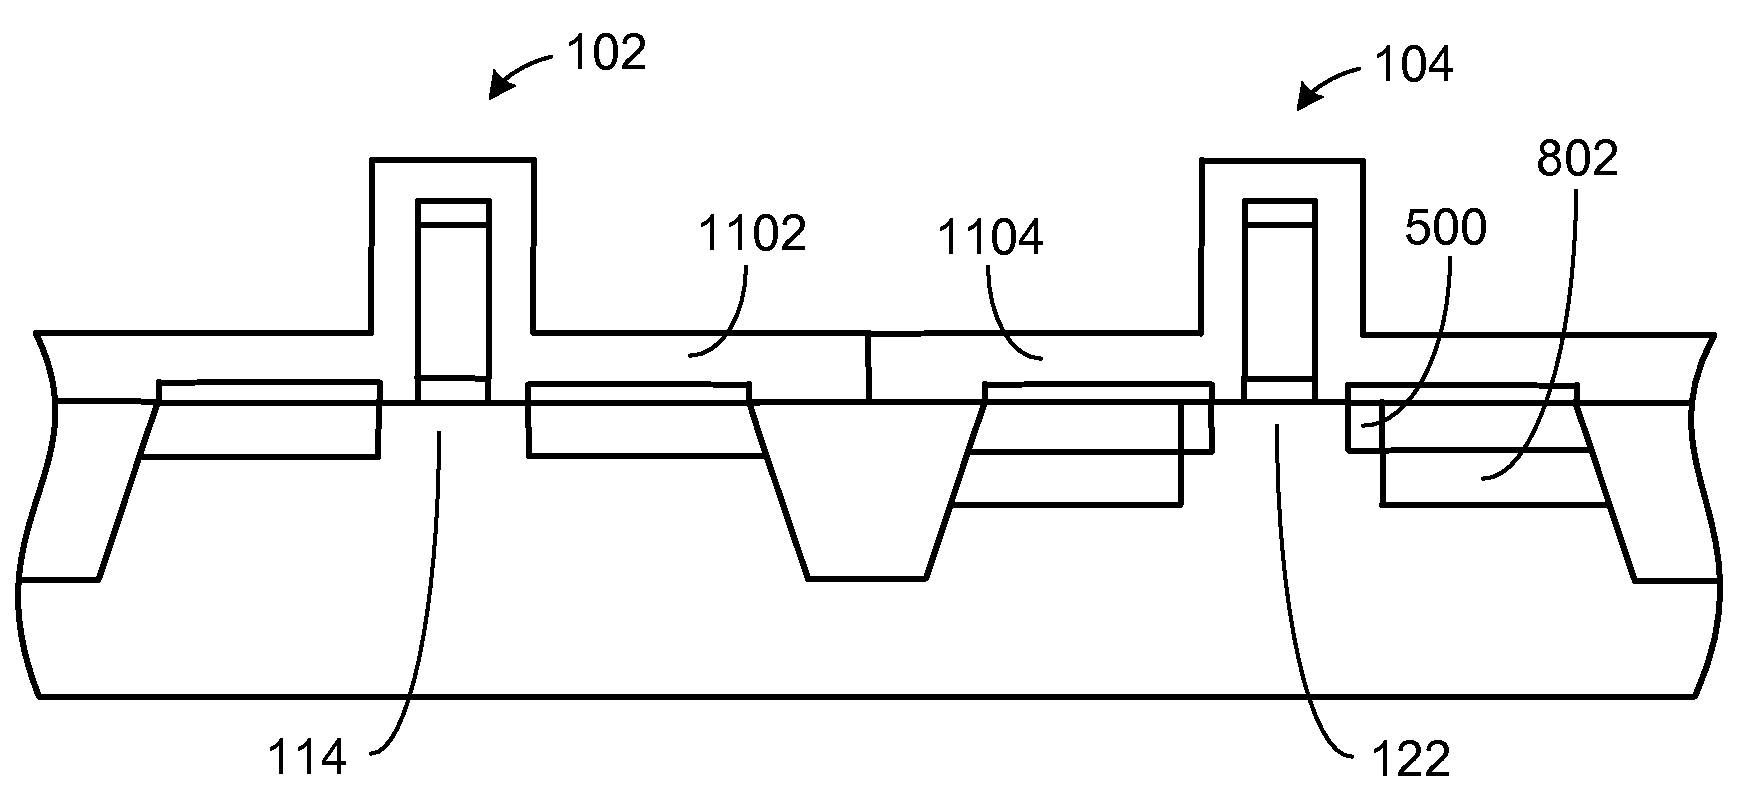 Integrated circuit system employing a condensation process